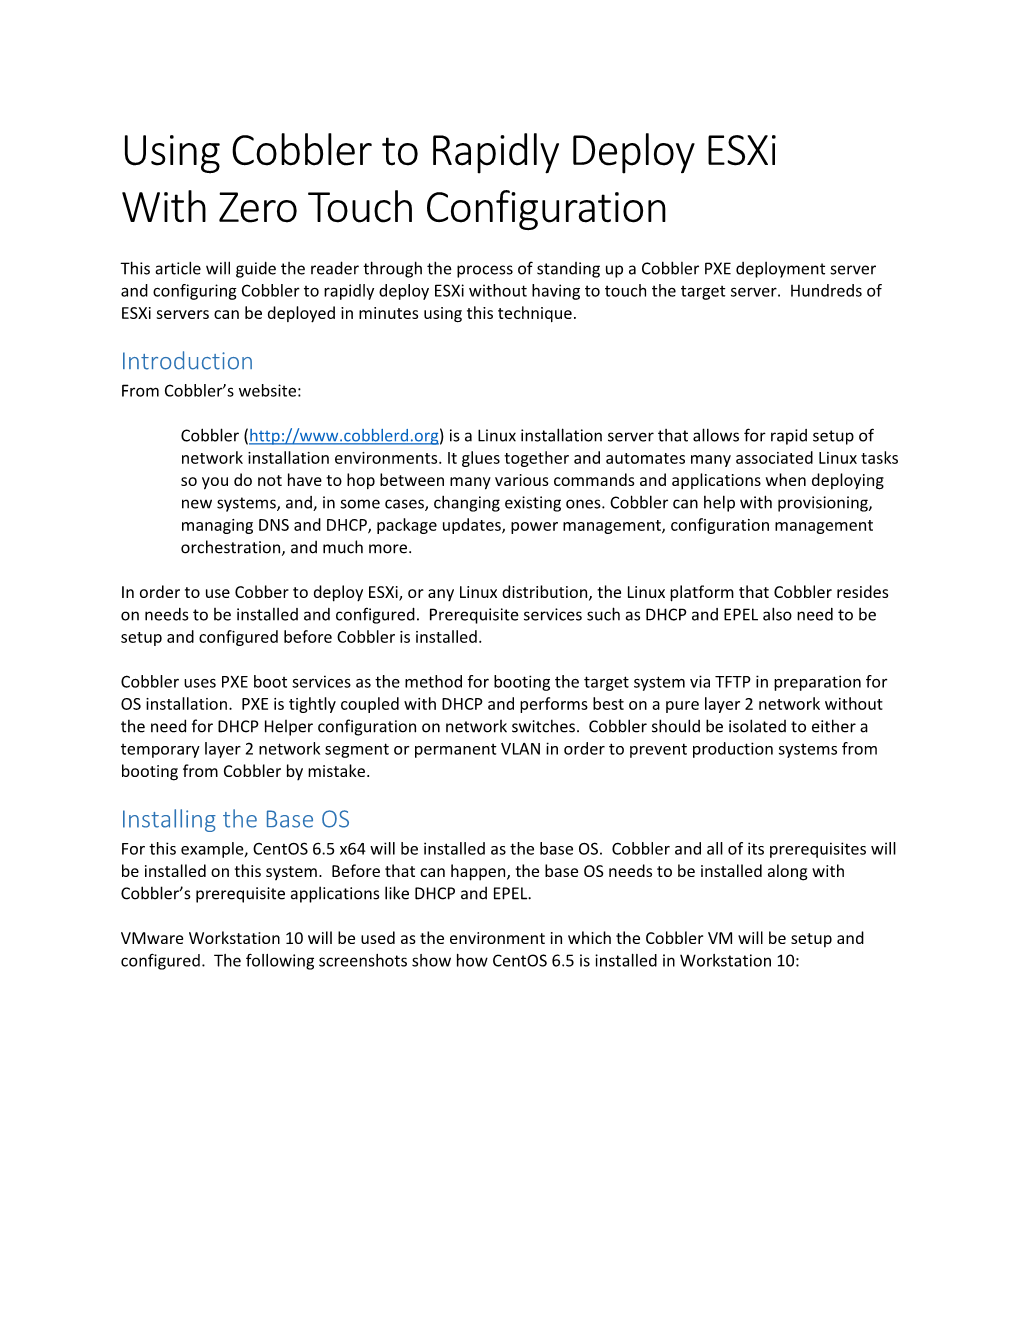 Using Cobbler to Rapidly Deploy Esxi with Zero Touch Configuration